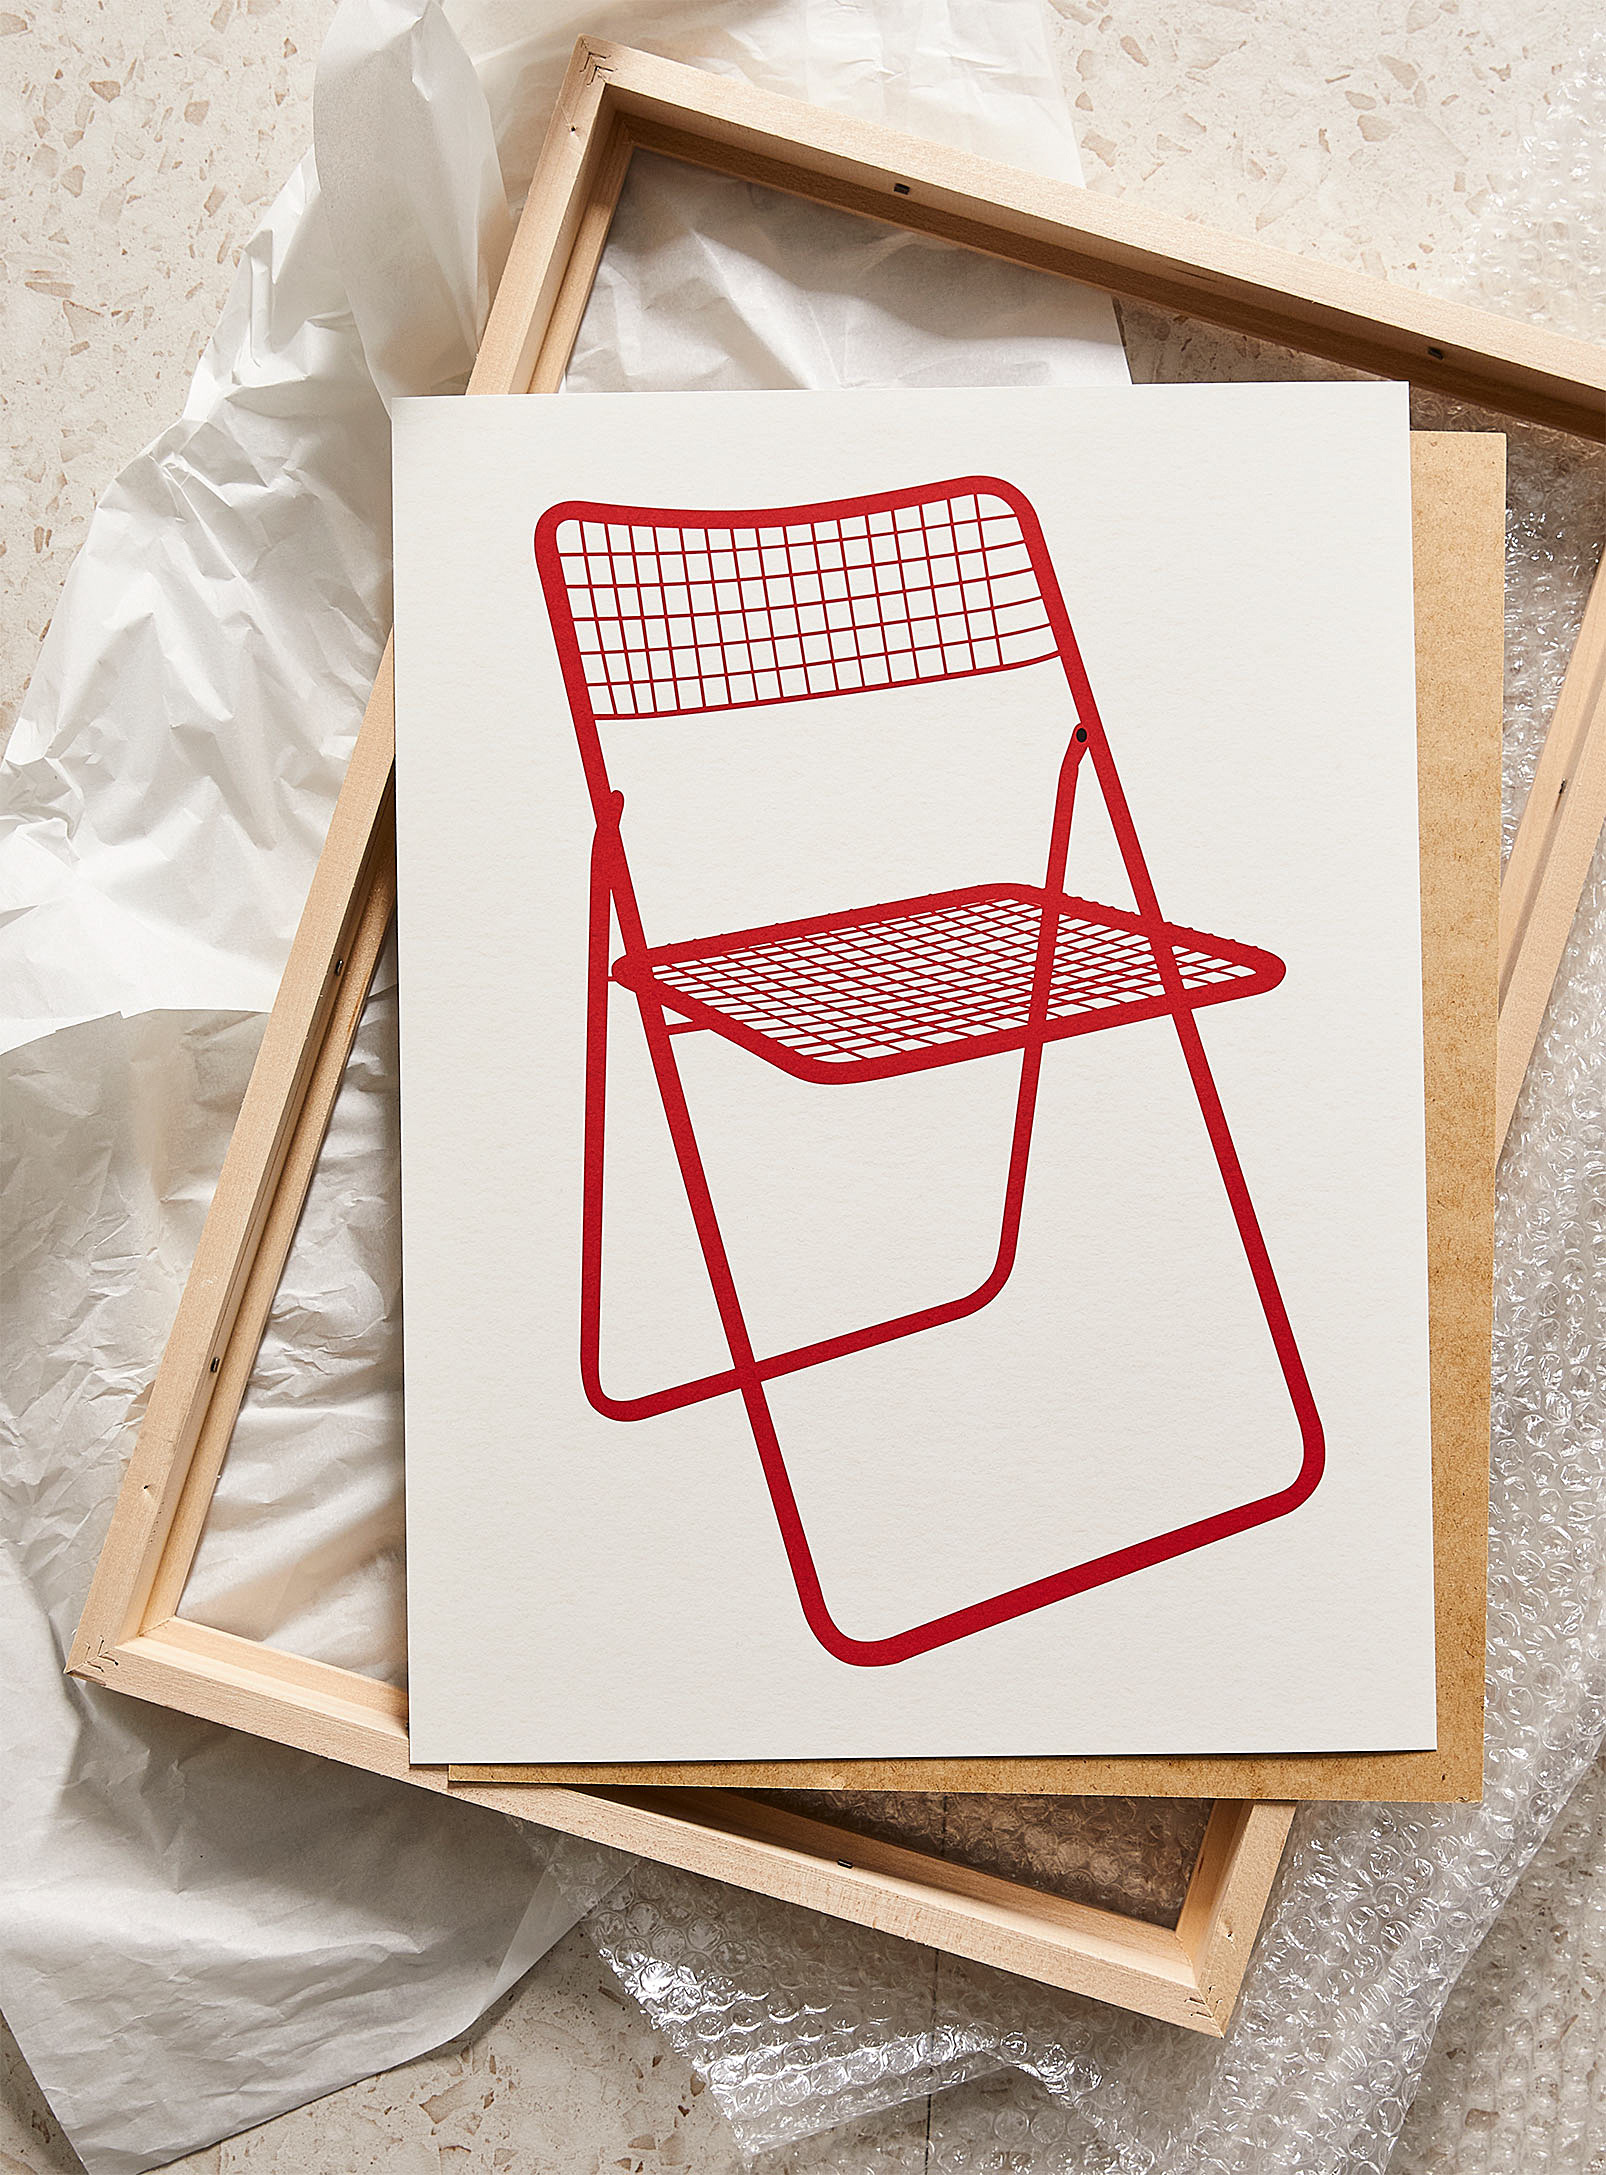 Simons Maison - Ted Net chair art print See available sizes